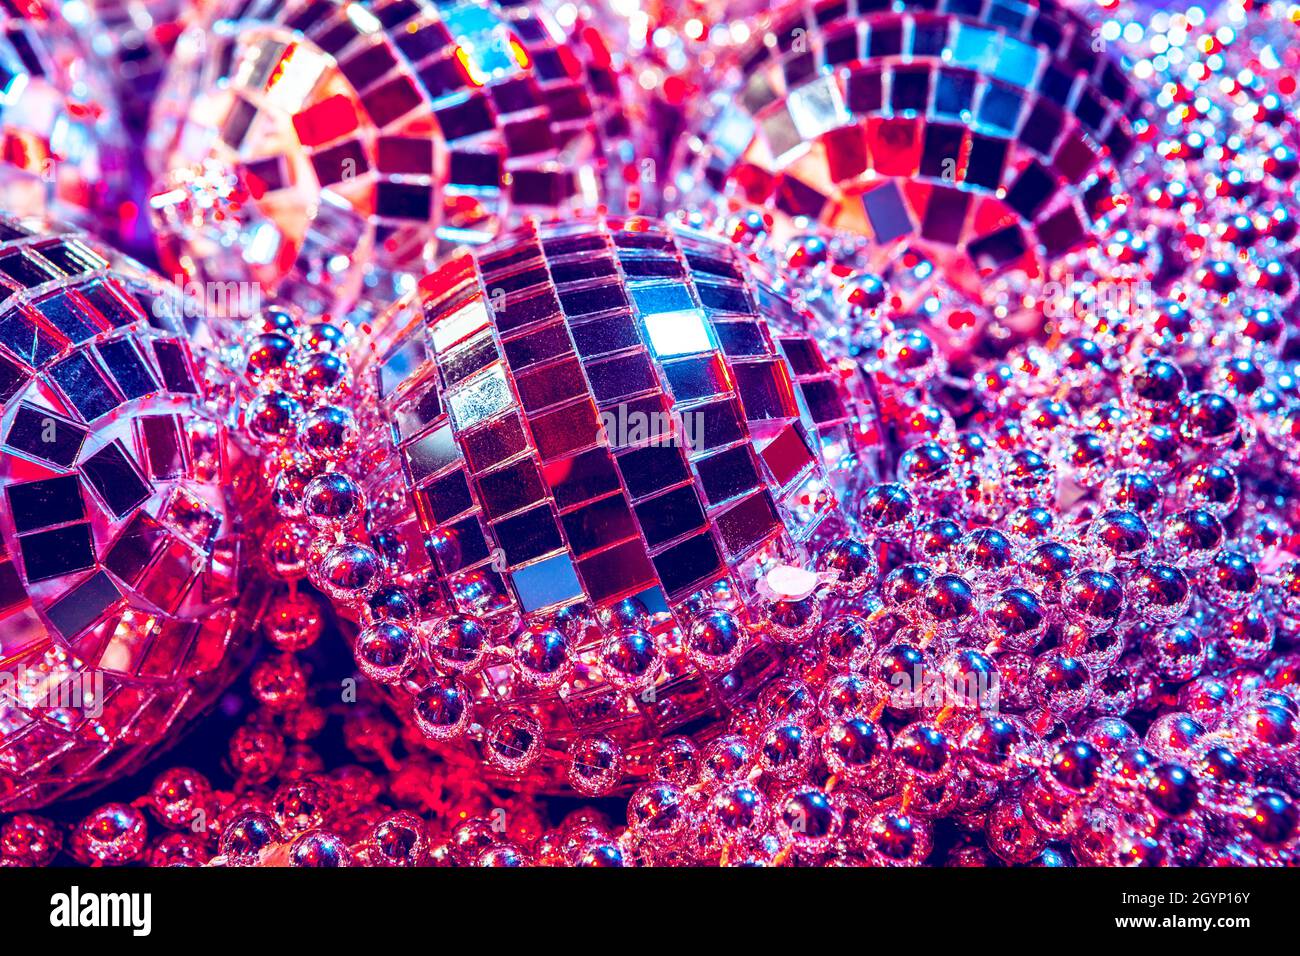 Shiny disco balls with small mirror mosaic. Closeup on spherical